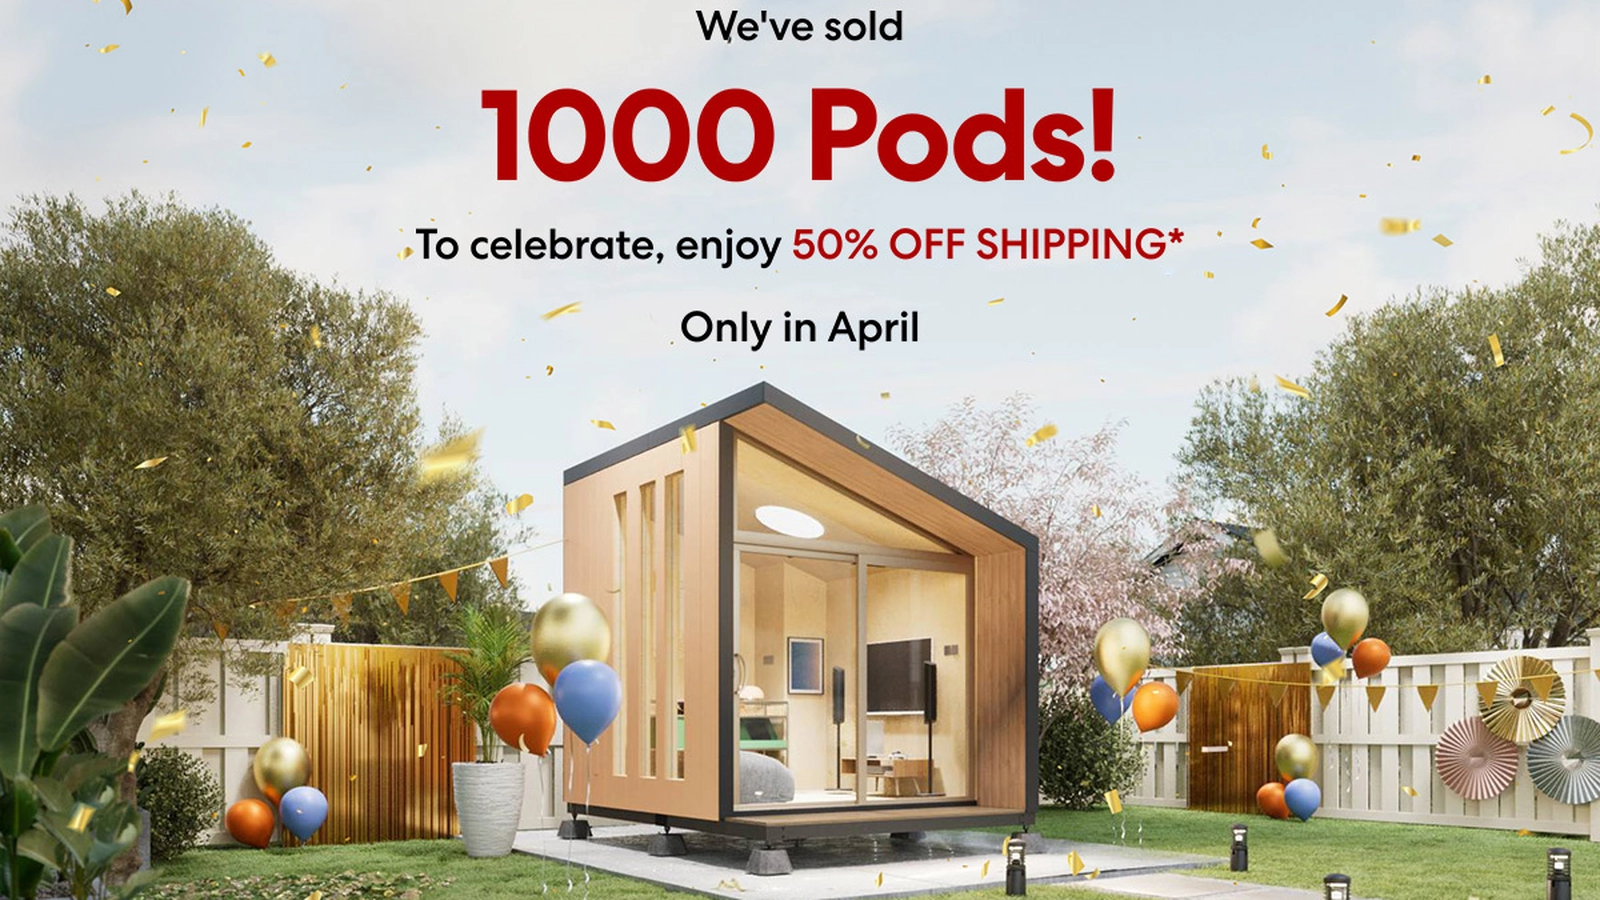 Join the 1000 Pod celebration today and get 50% OFF shipping